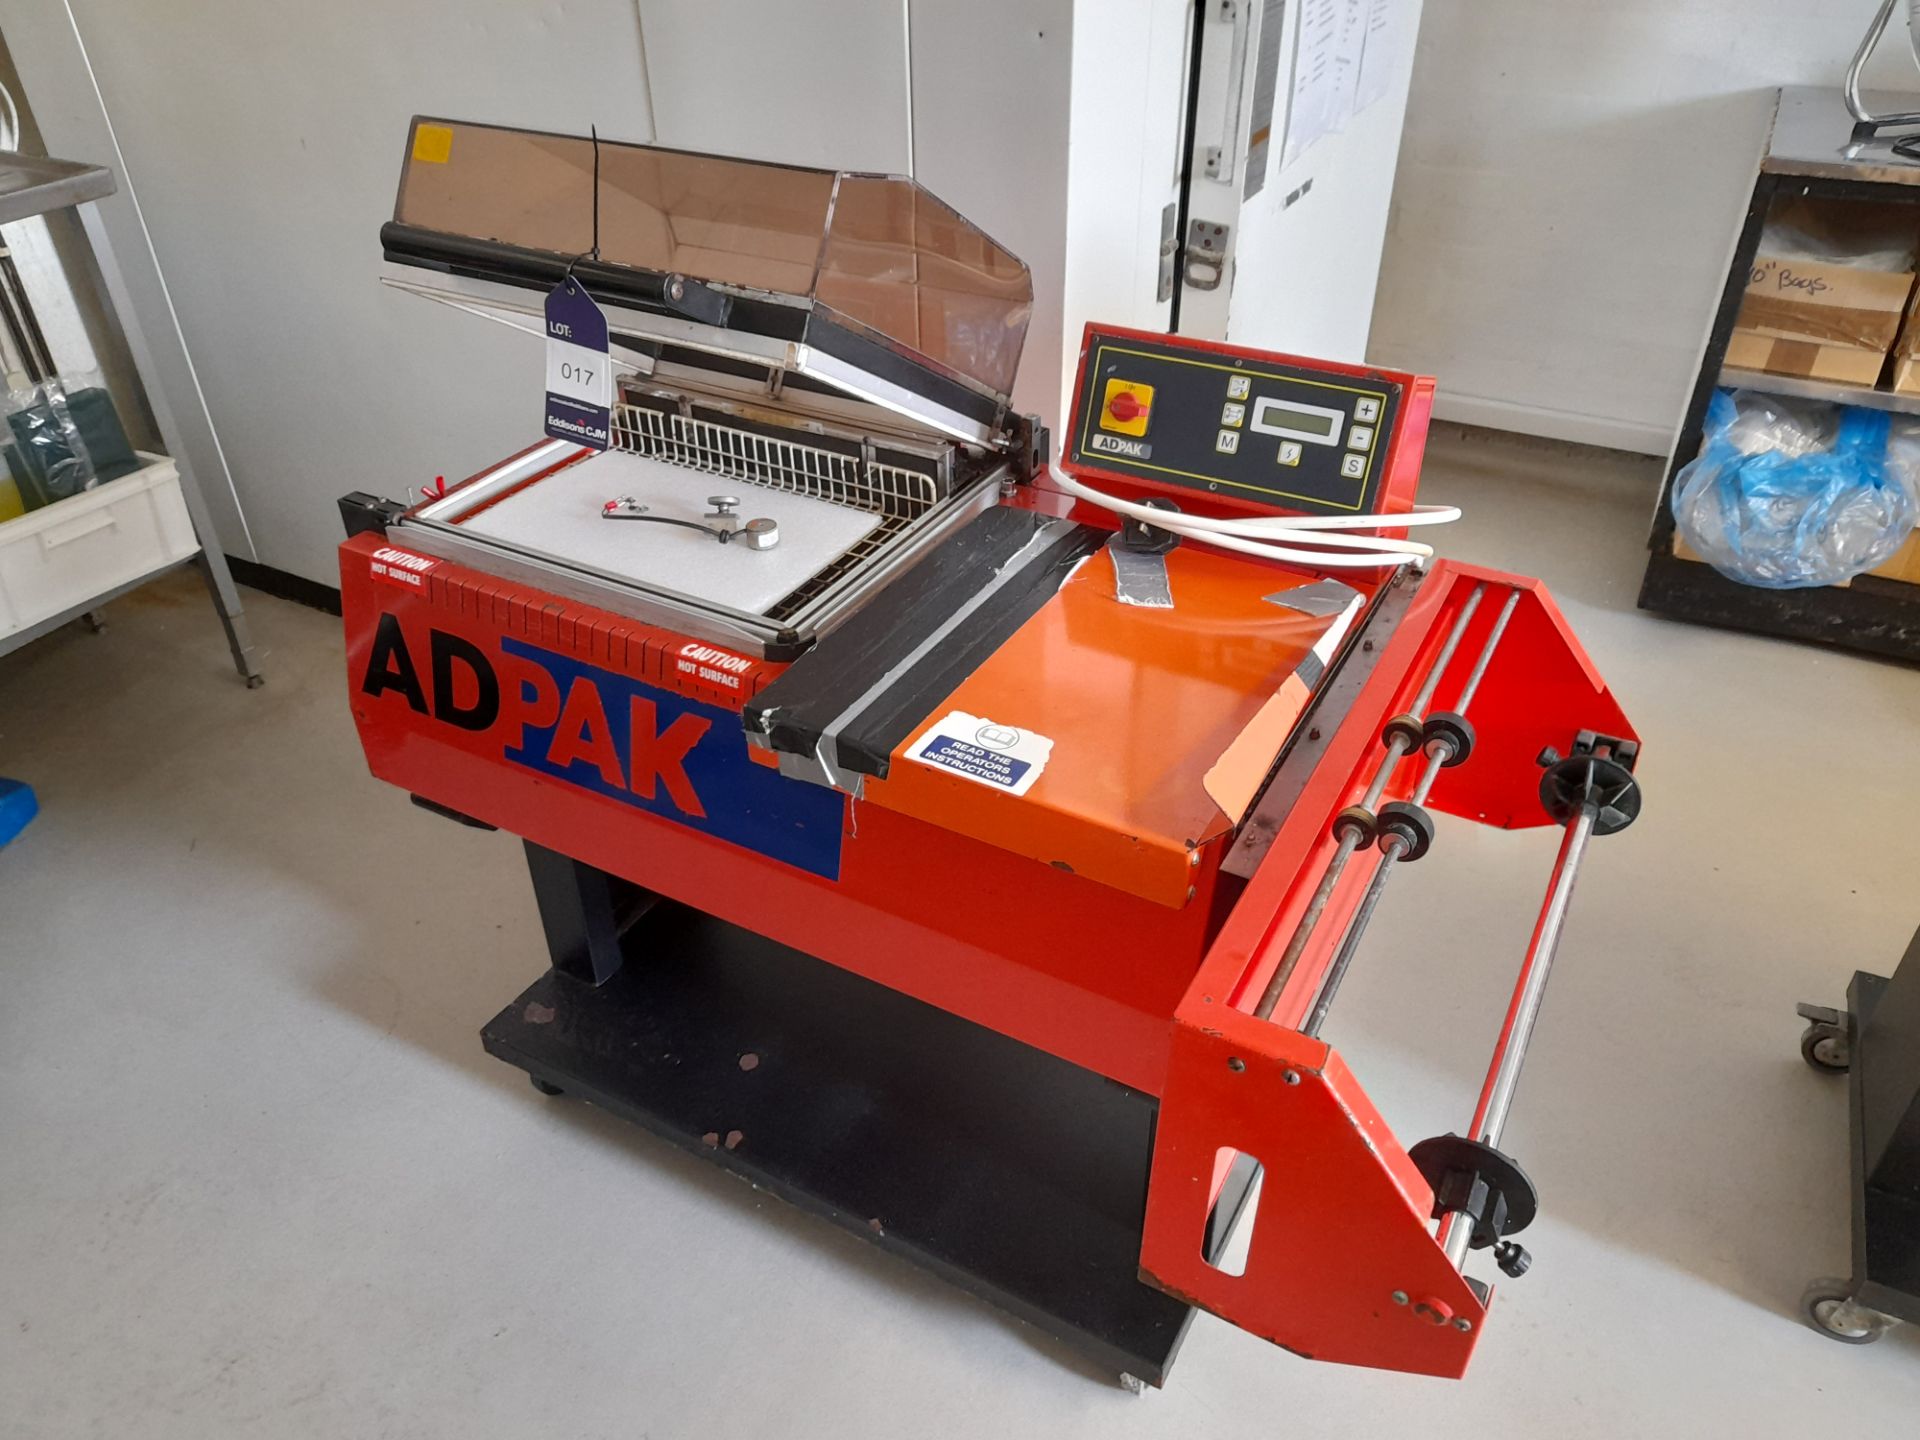 Adpak AD440 Shrink Wrapping Machin, Year: 2007, Serial: 0018312 (Advise Requires New Magnet). (